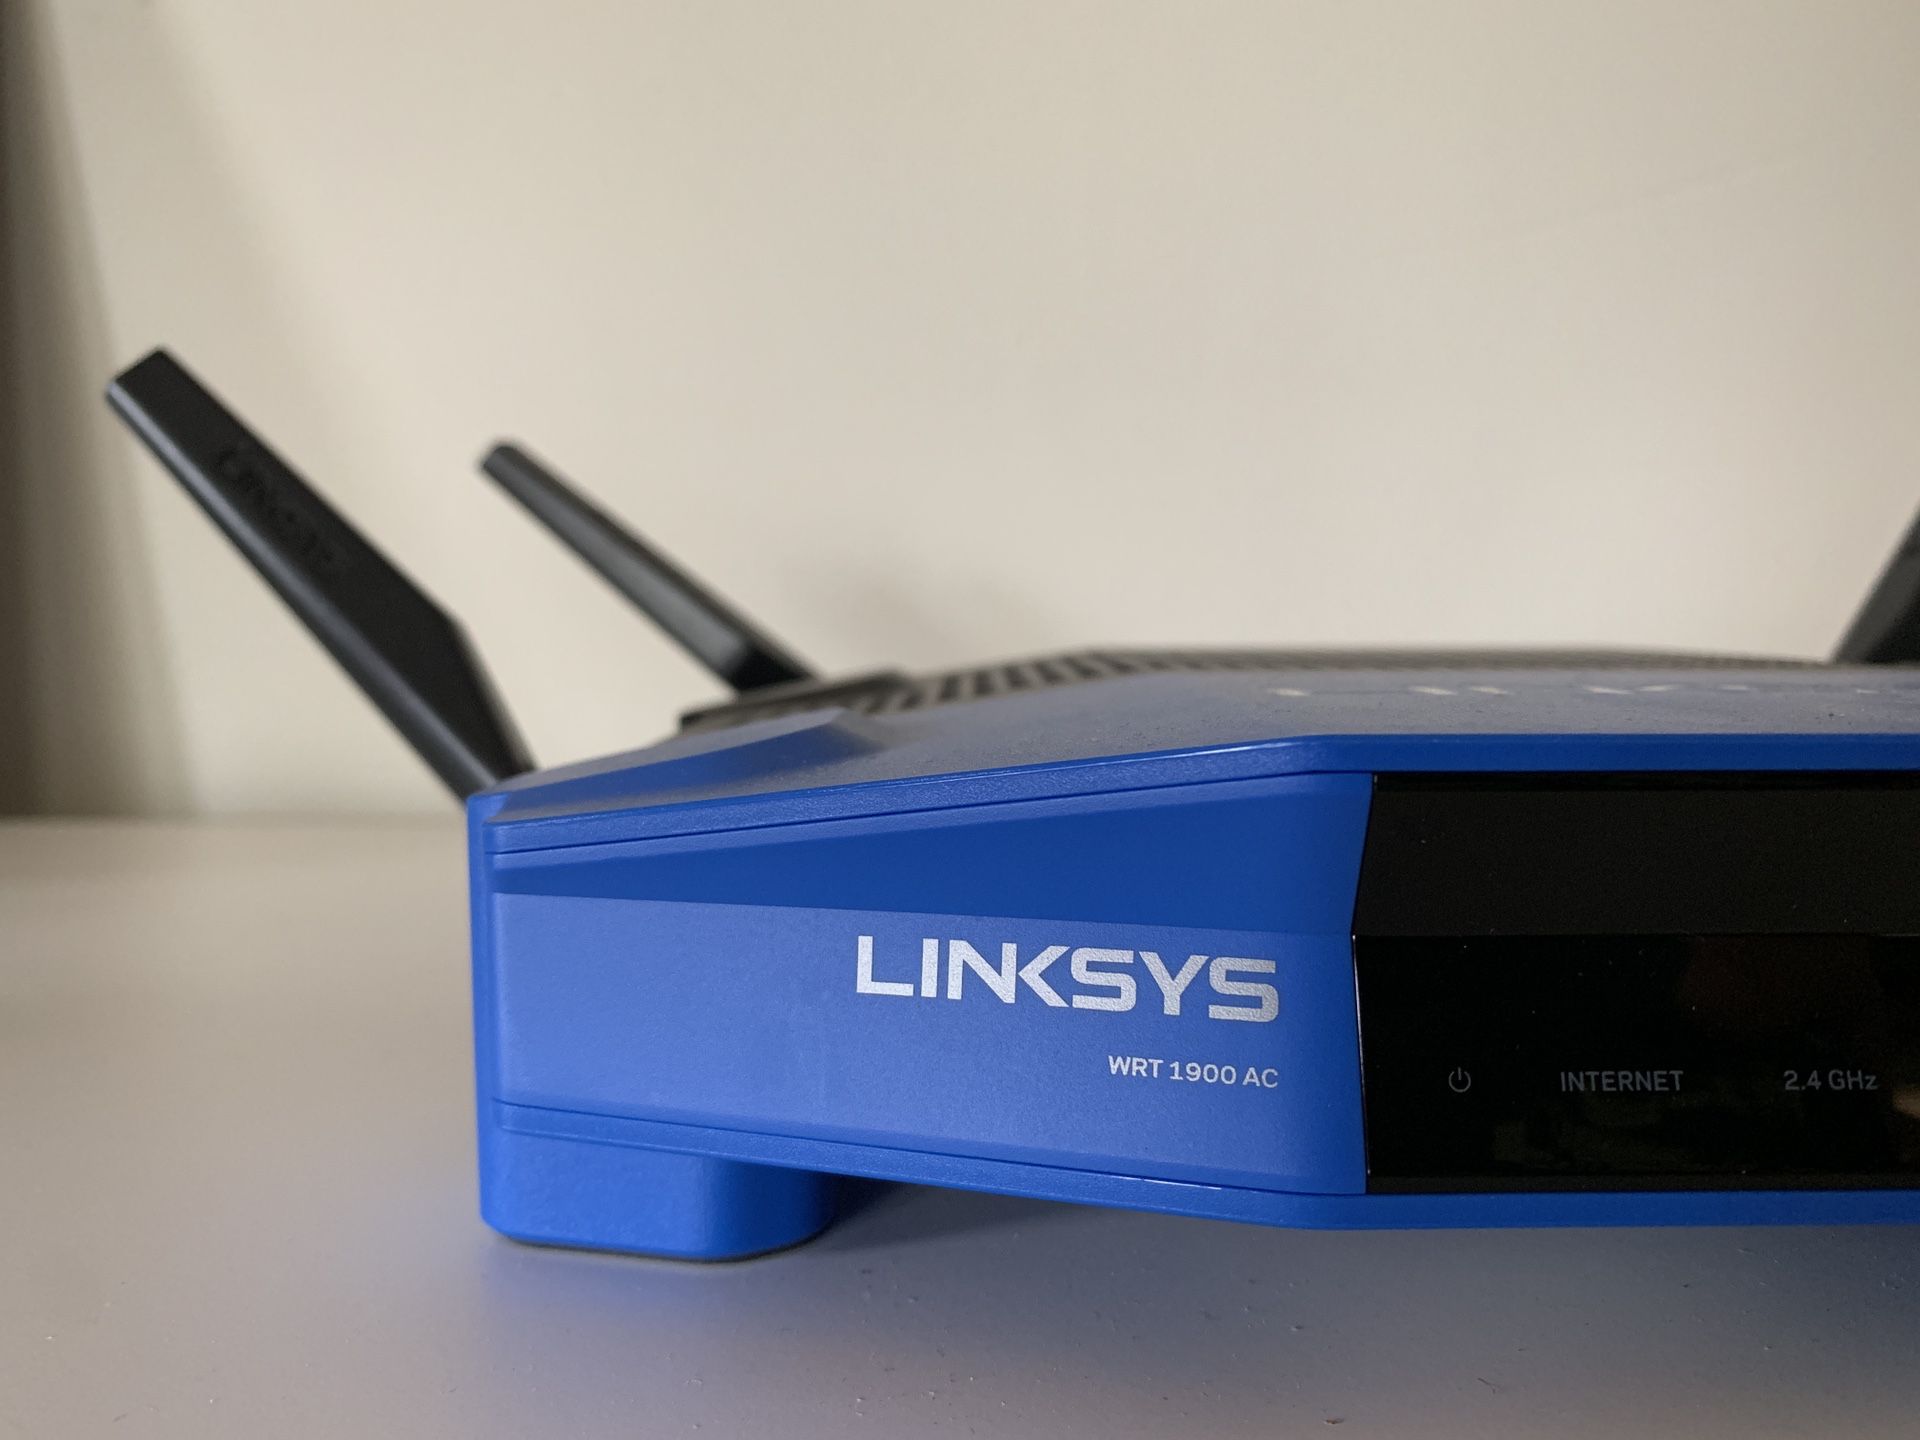 Linksys WRT 1900 AC Router Dual band Wireless